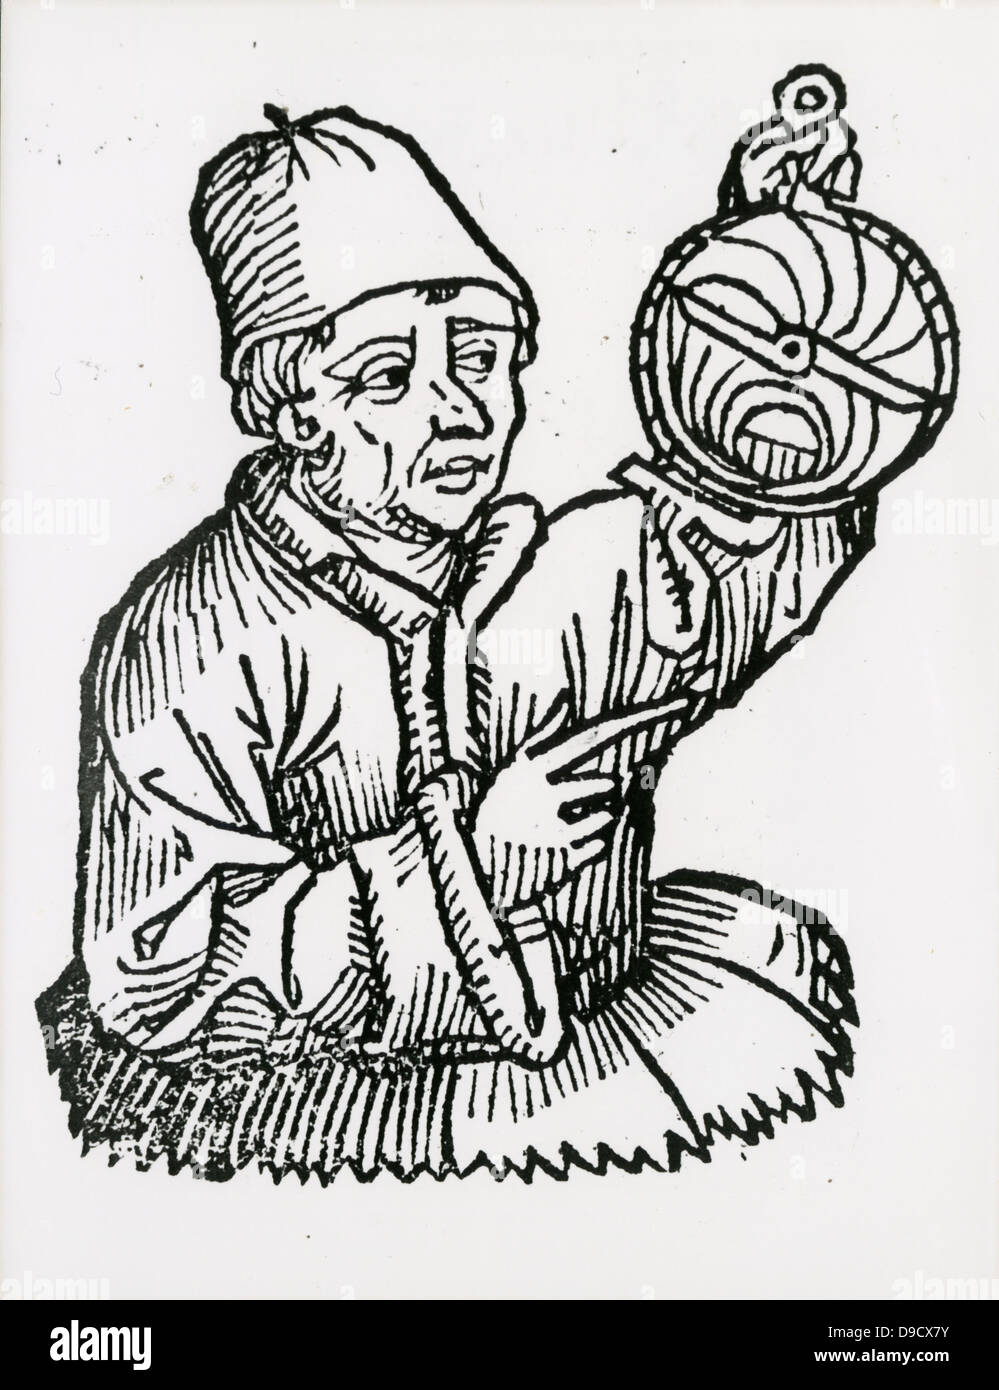 Johannes Muller von Konigsberg (1436-1476) best known today as Regiomontanus, German mathematician, astronomer, and translator, shown holding an astrolabe. Woodcut, 1493. Stock Photo